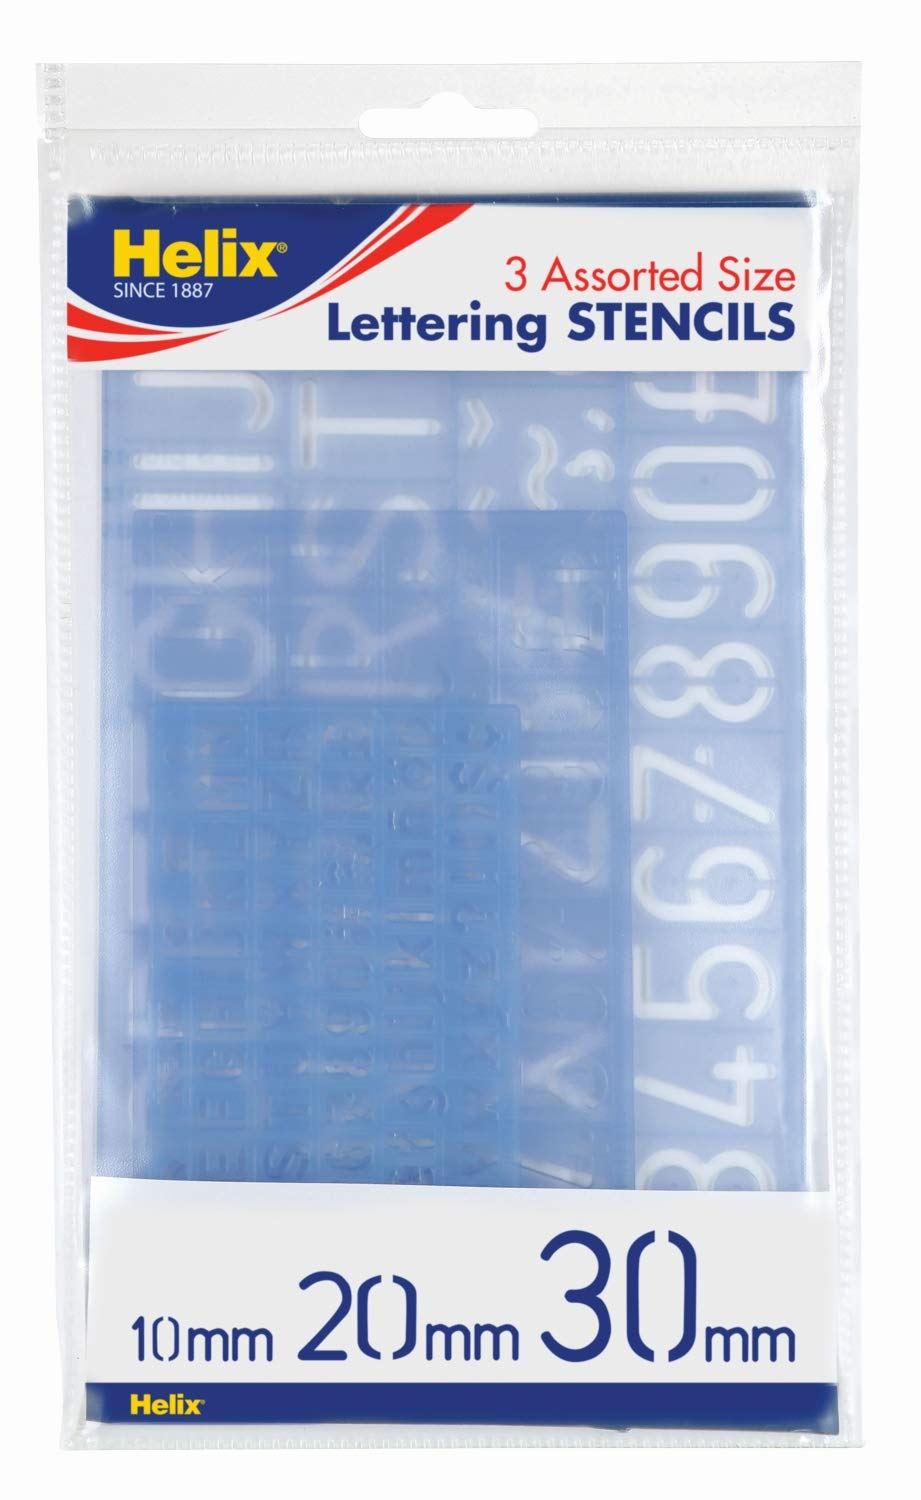 Helix 3 Assorted Size Lettering Stencils 10mm, 20mm, 30mm H90